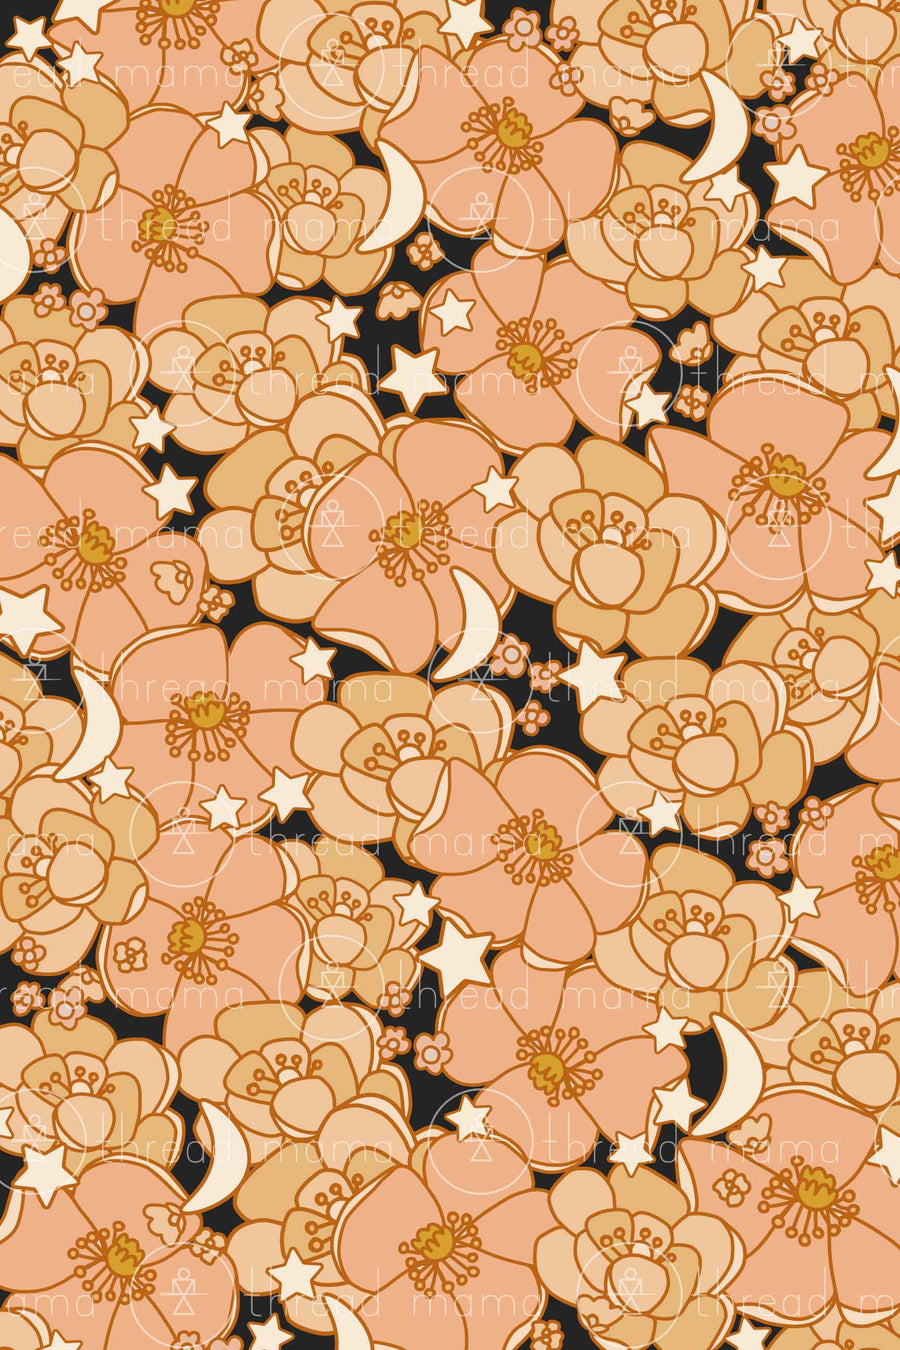 Fall Floral Background 2 (Printable Poster)